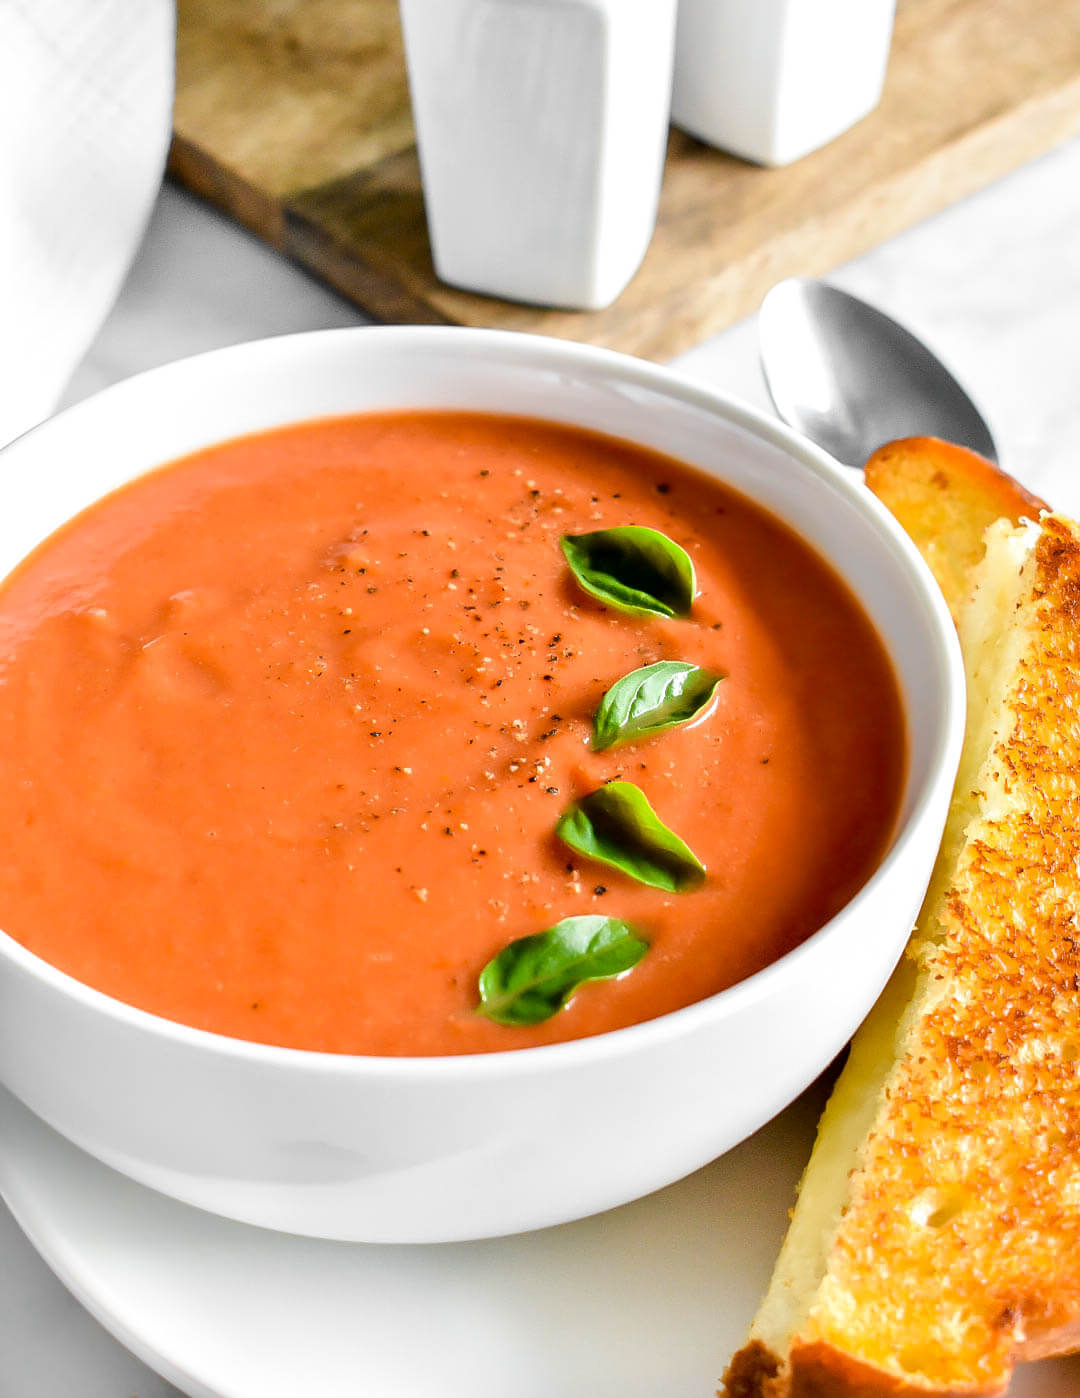 A bowl of tomato soup with fresh basil leaves on top.